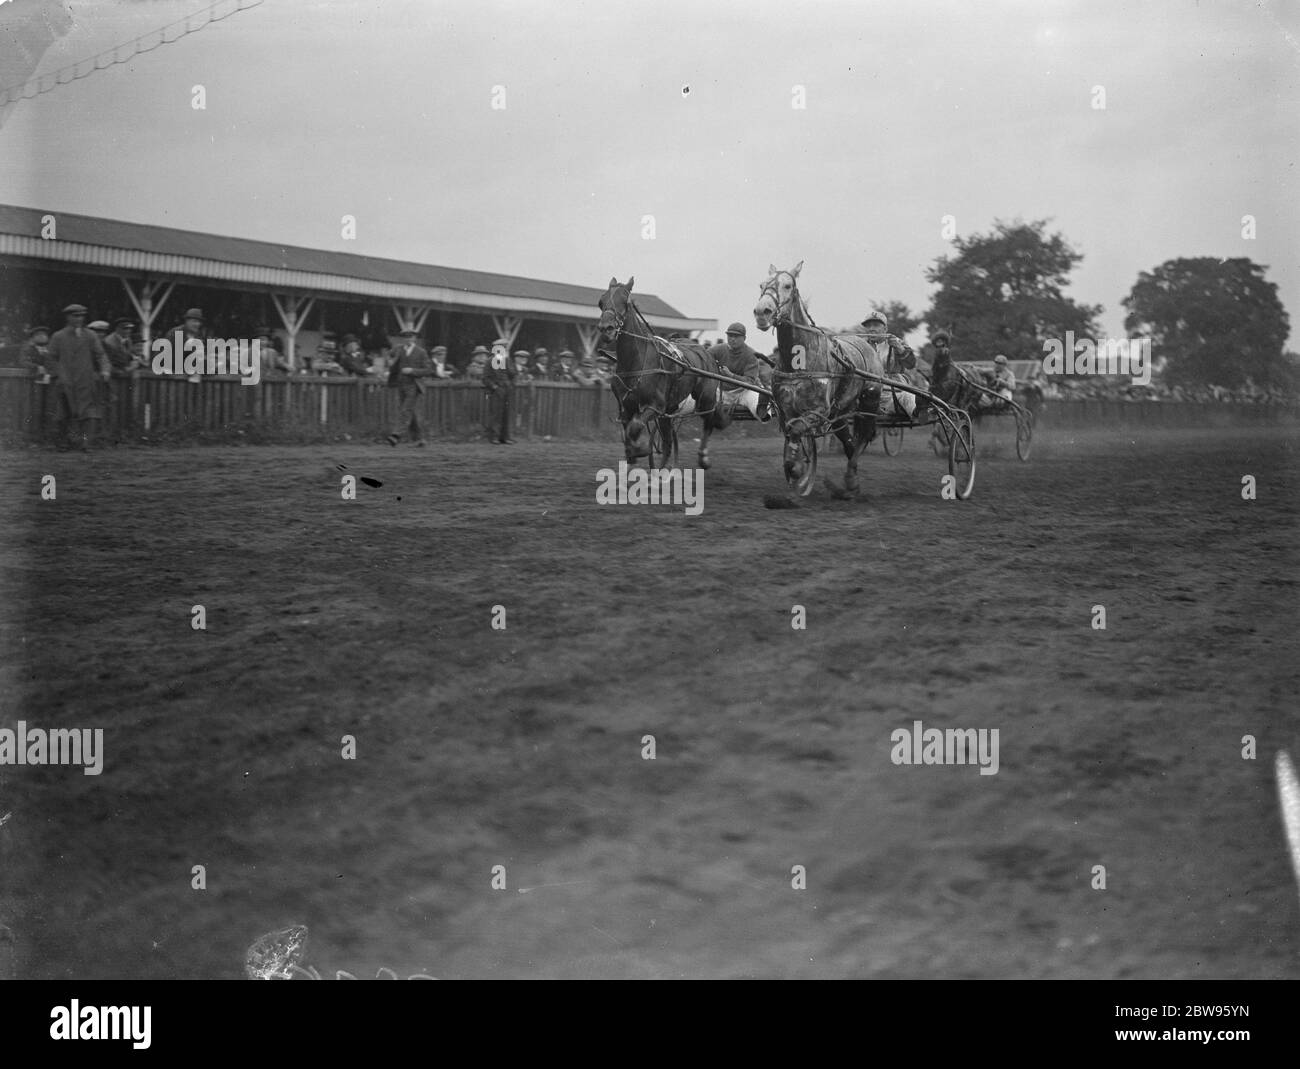 Winning by a nose at Greenford trotting races . Mr Craddock 's La Milo II , ridden by Mr Brazier , won the Amateur Drivers Sweepstake trotting race at Greenford , Middlesex , from Misery , by a nose . La Milo II nearest camera , winning the Amateur Drivers Sweepstake by a nose at Greenford . 5 September 1932 Stock Photo